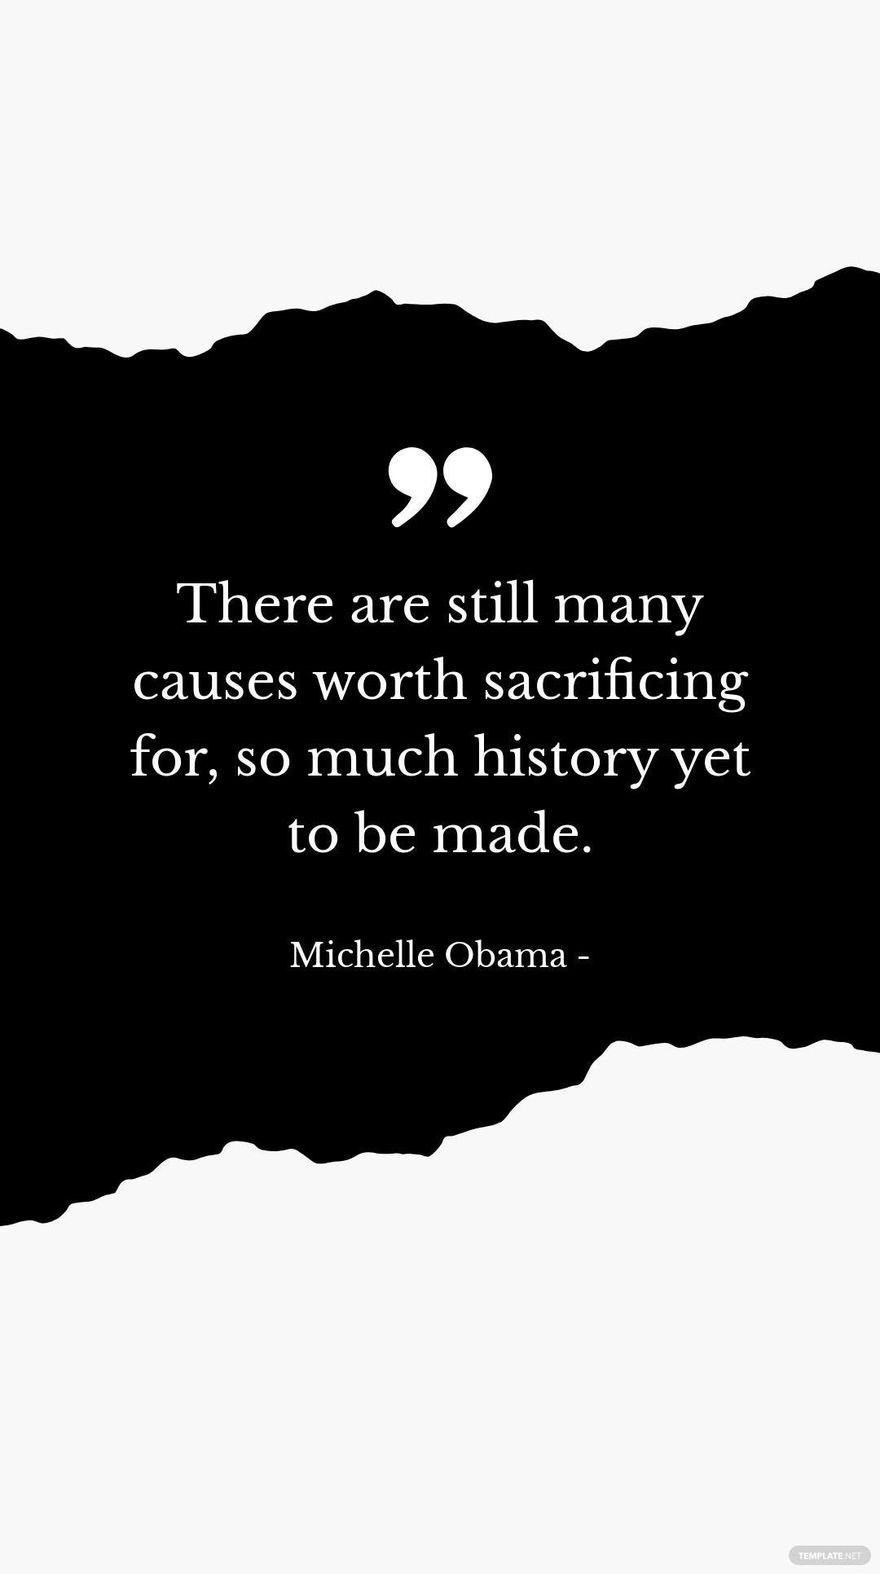 Michelle Obama - There are still many causes worth sacrificing for, so much history yet to be made.